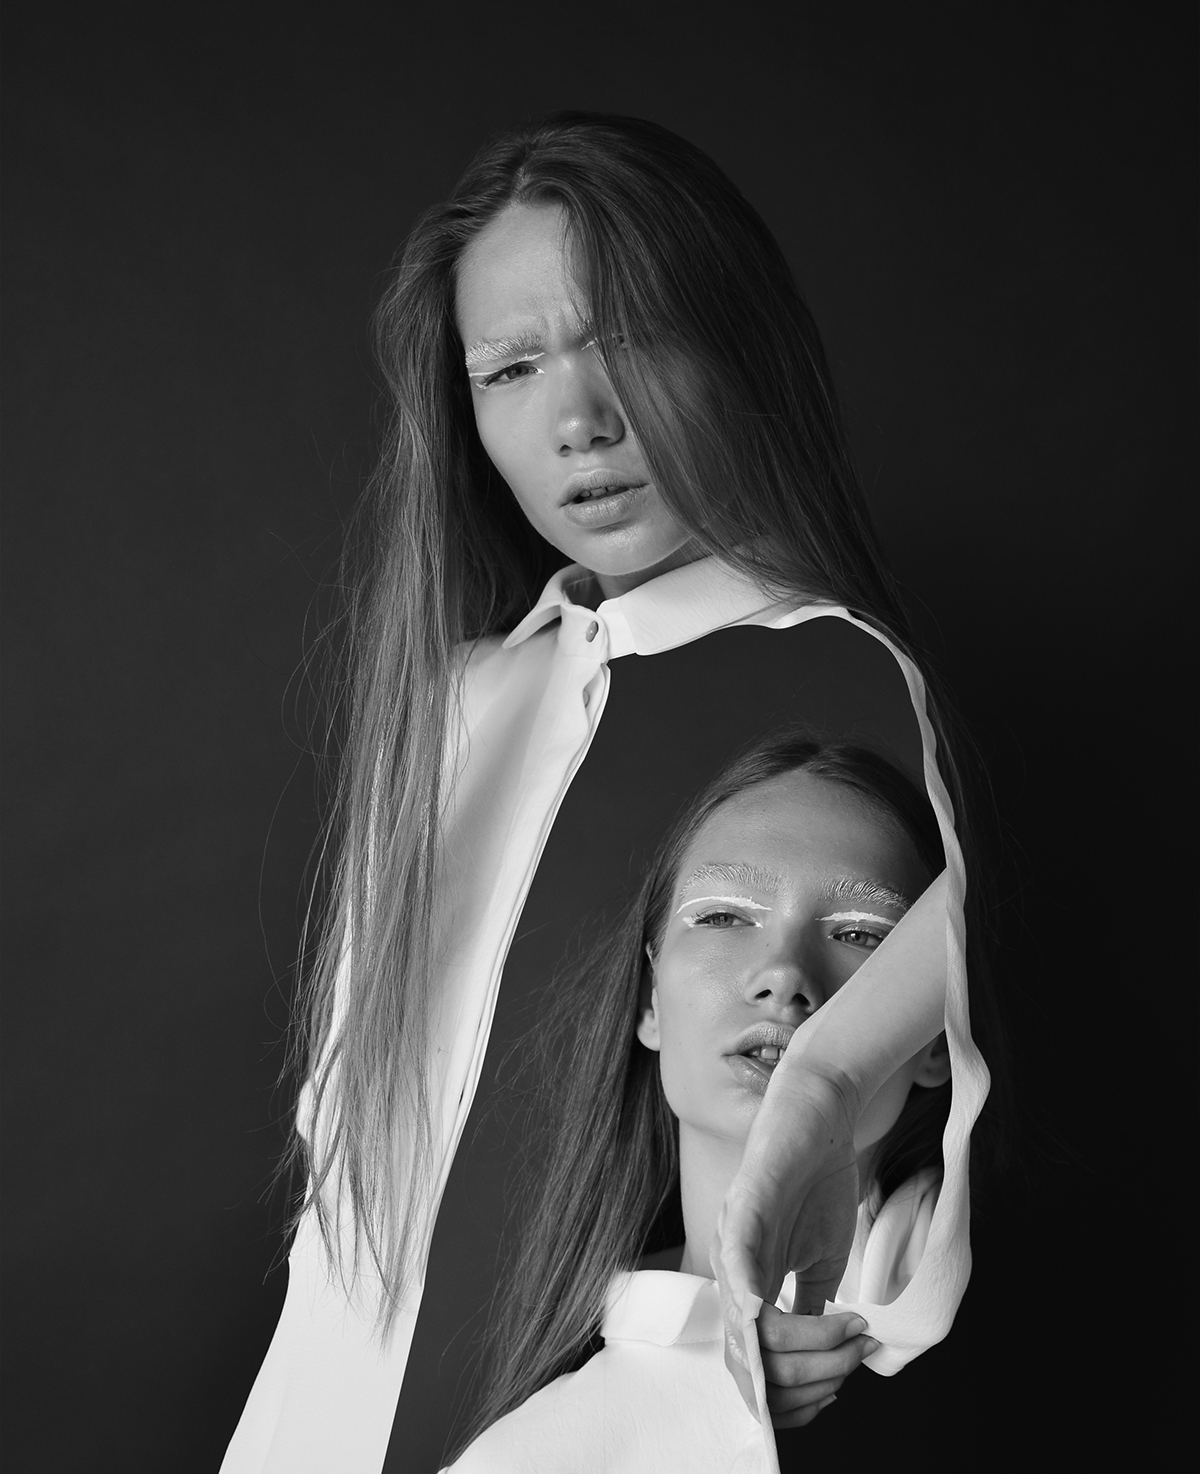 test model shoot paint Make Up dust White black editorial Young